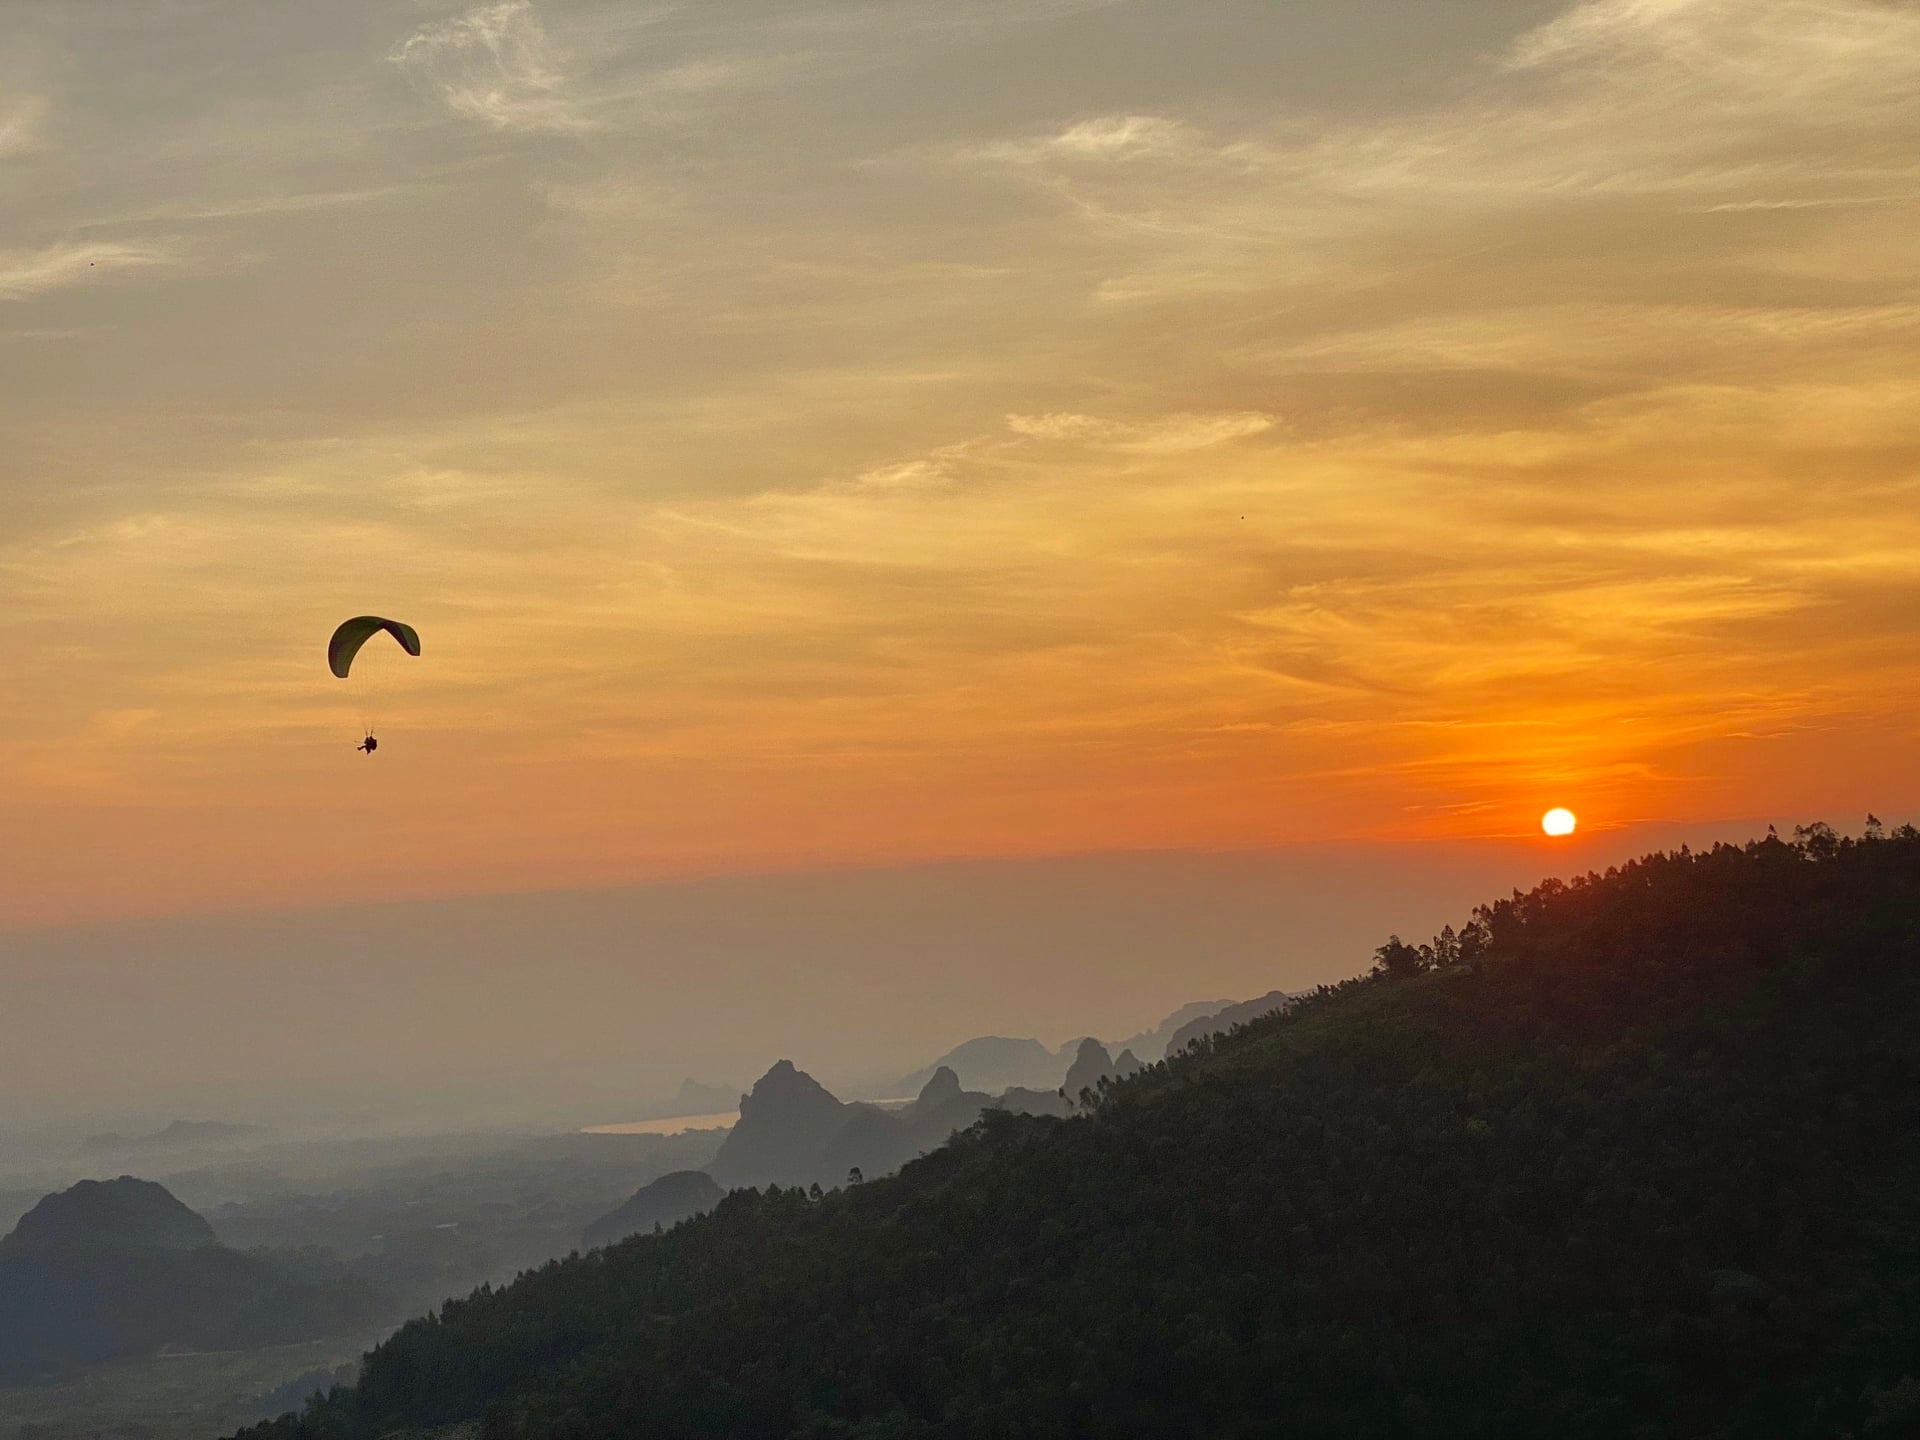 Paragliders fly under the sunset at Bu Hill on the outskirts of Hanoi, Vietnam. Photo by courtesy of Mebayluon